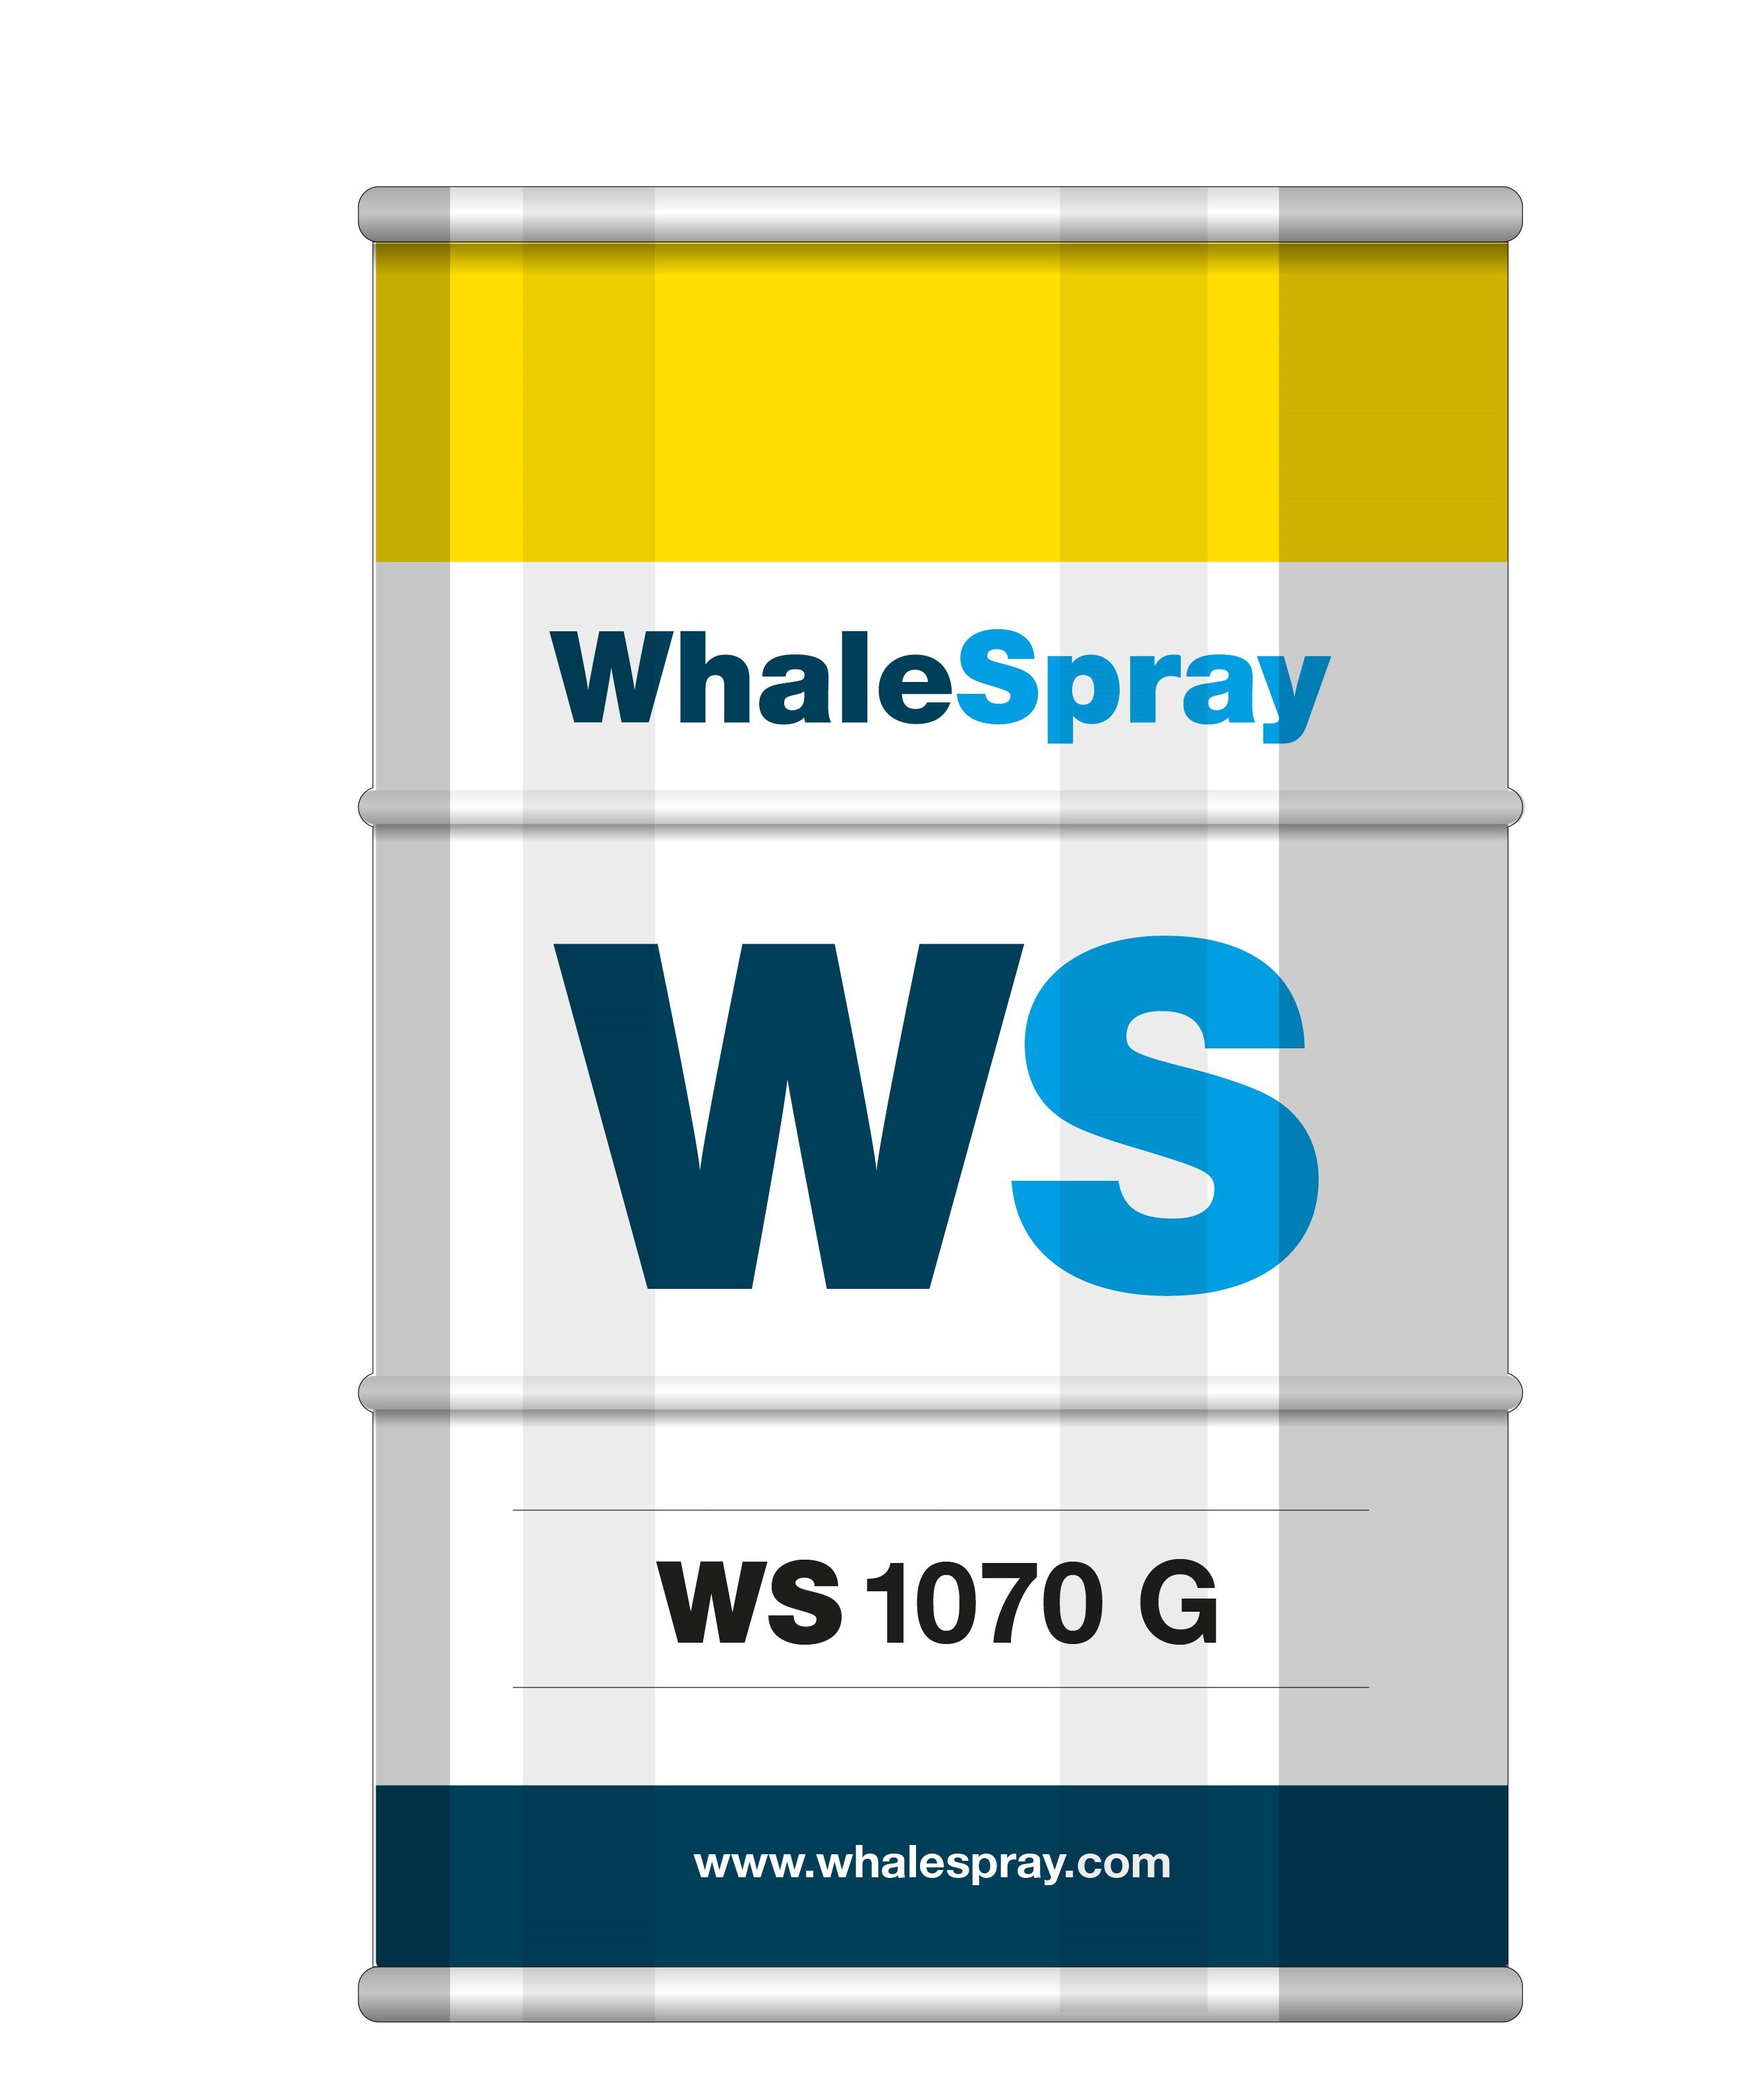 ACEITE REDUCTORES ALTA H1 WHALE SPRAY WS1070G/13 ISO 220 5LT